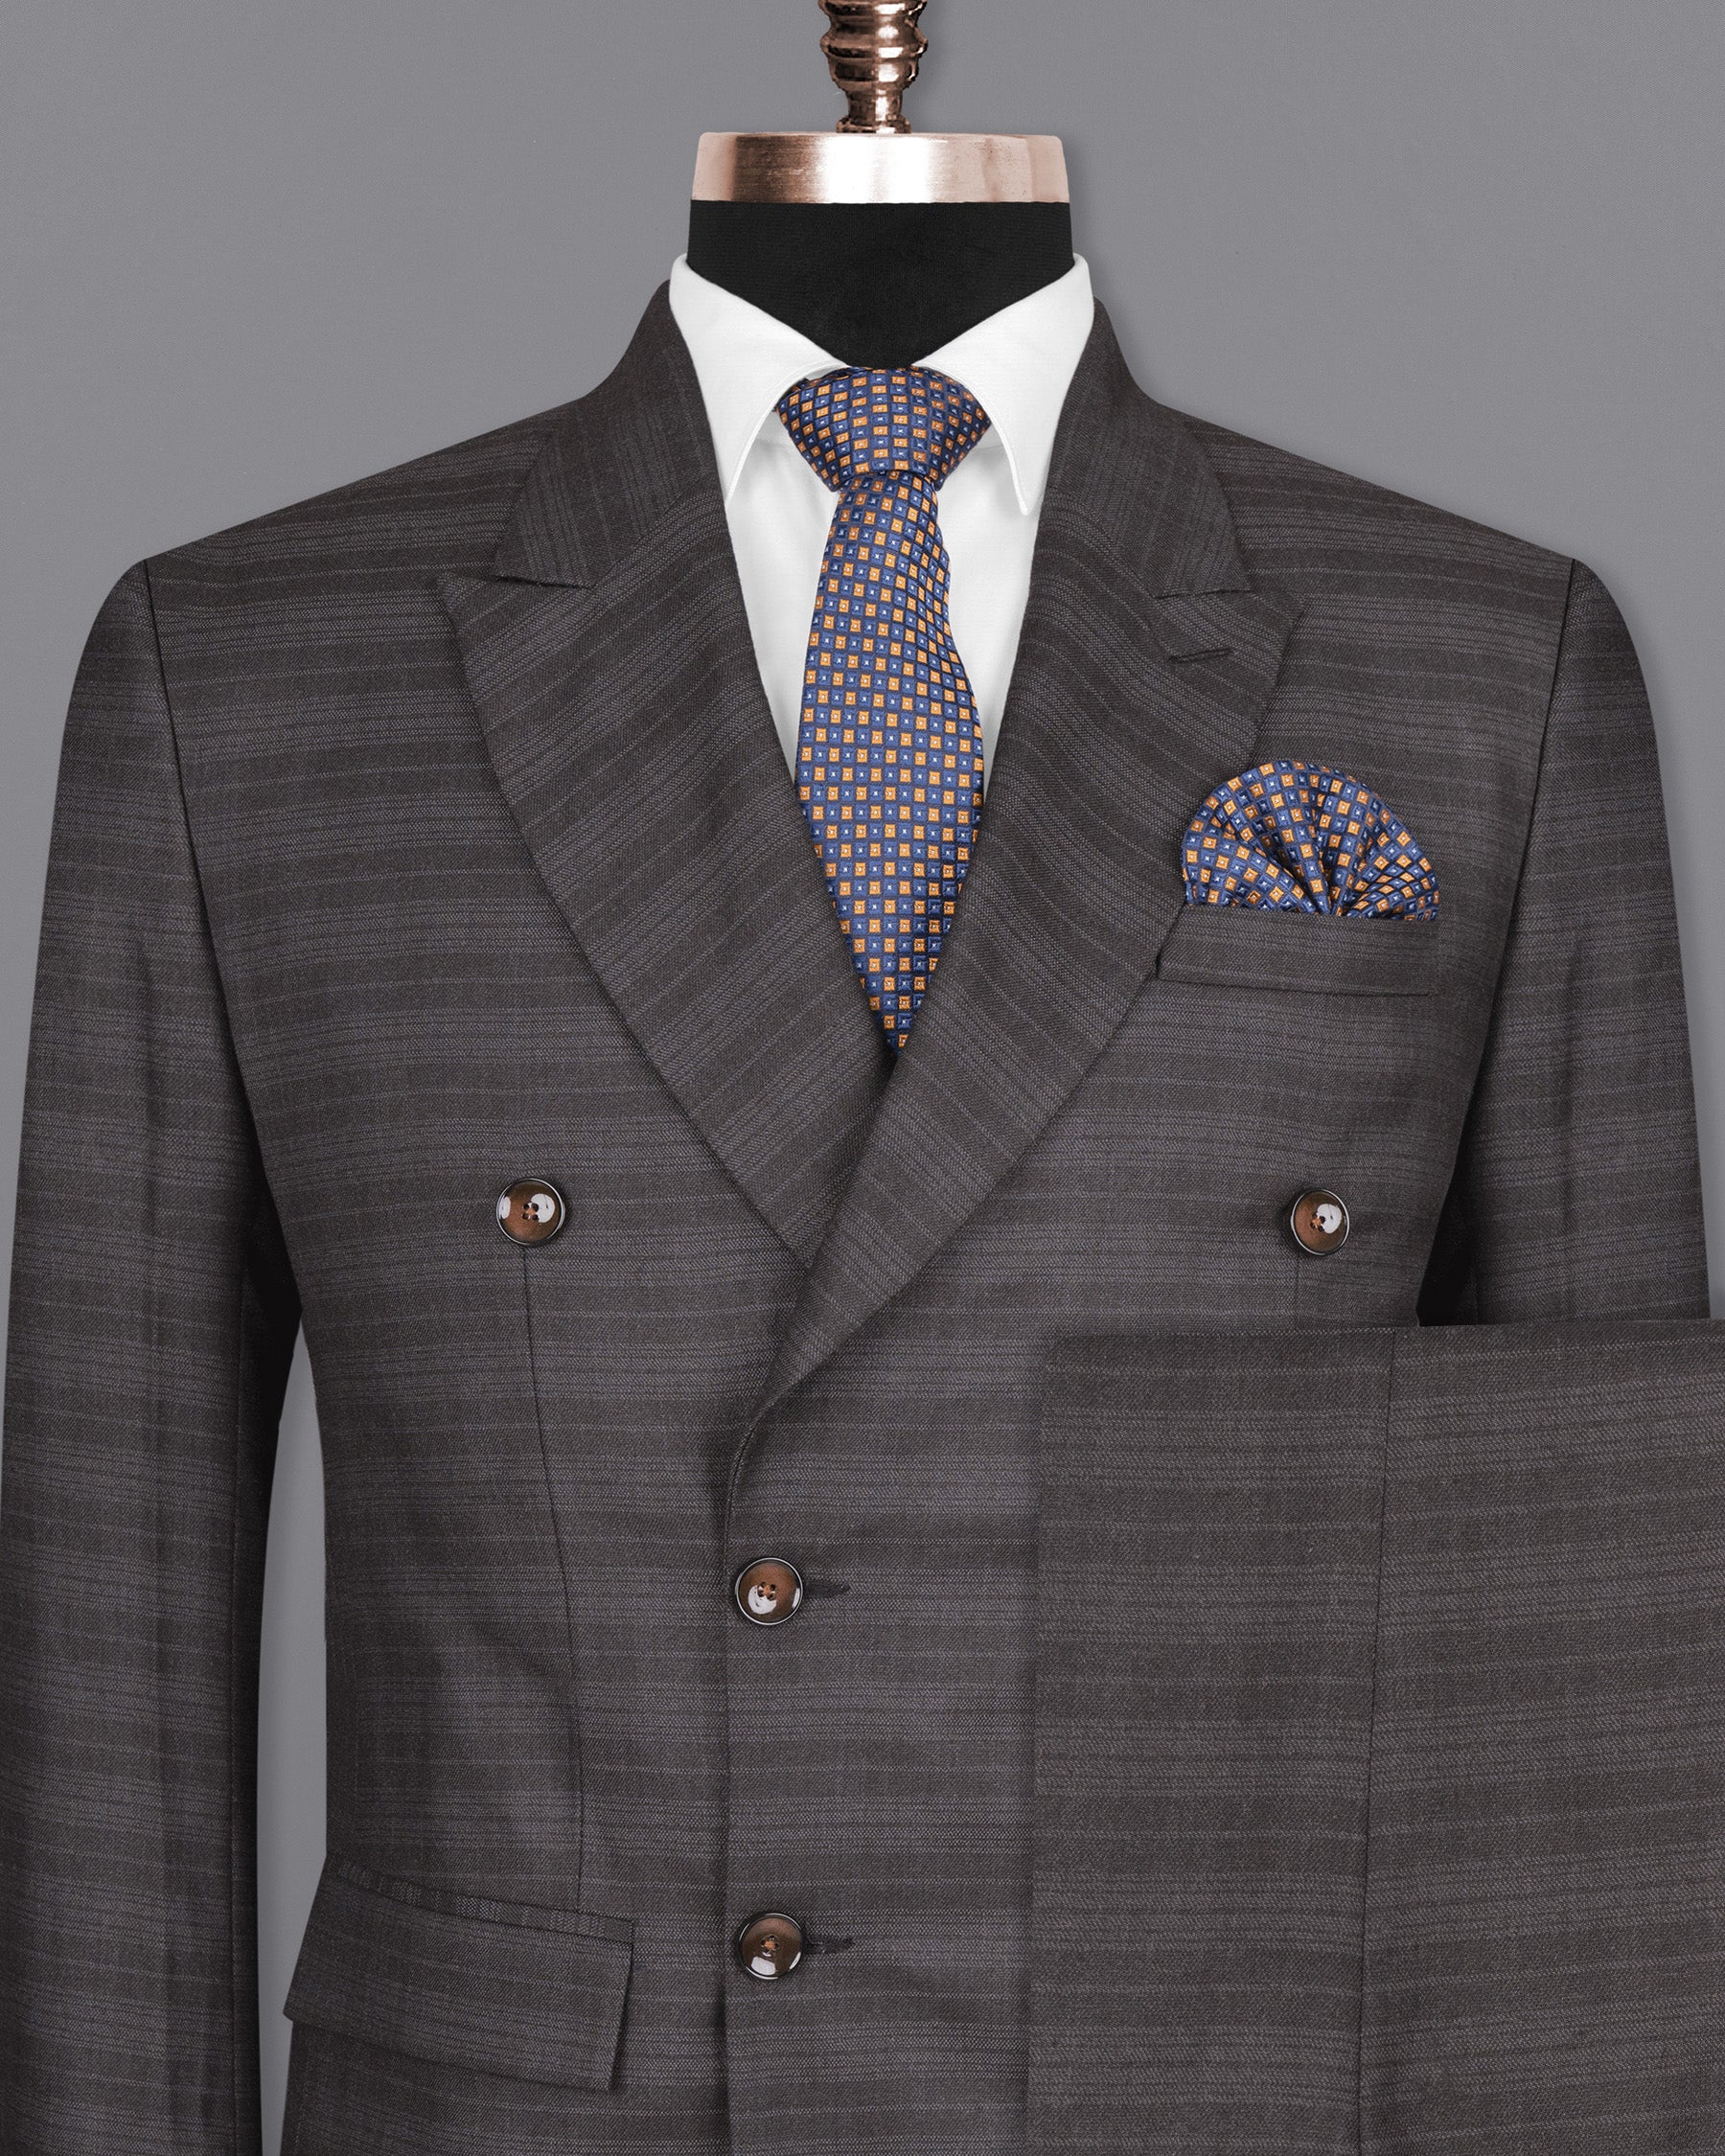 Grape Grey Double Breasted Striped Woolrich Suit ST1554-DB-36, ST1554-DB-38, ST1554-DB-40, ST1554-DB-42, ST1554-DB-44, ST1554-DB-46, ST1554-DB-48, ST1554-DB-50, ST1554-DB-52, ST1554-DB-54, ST1554-DB-56, ST1554-DB-58, ST1554-DB-60